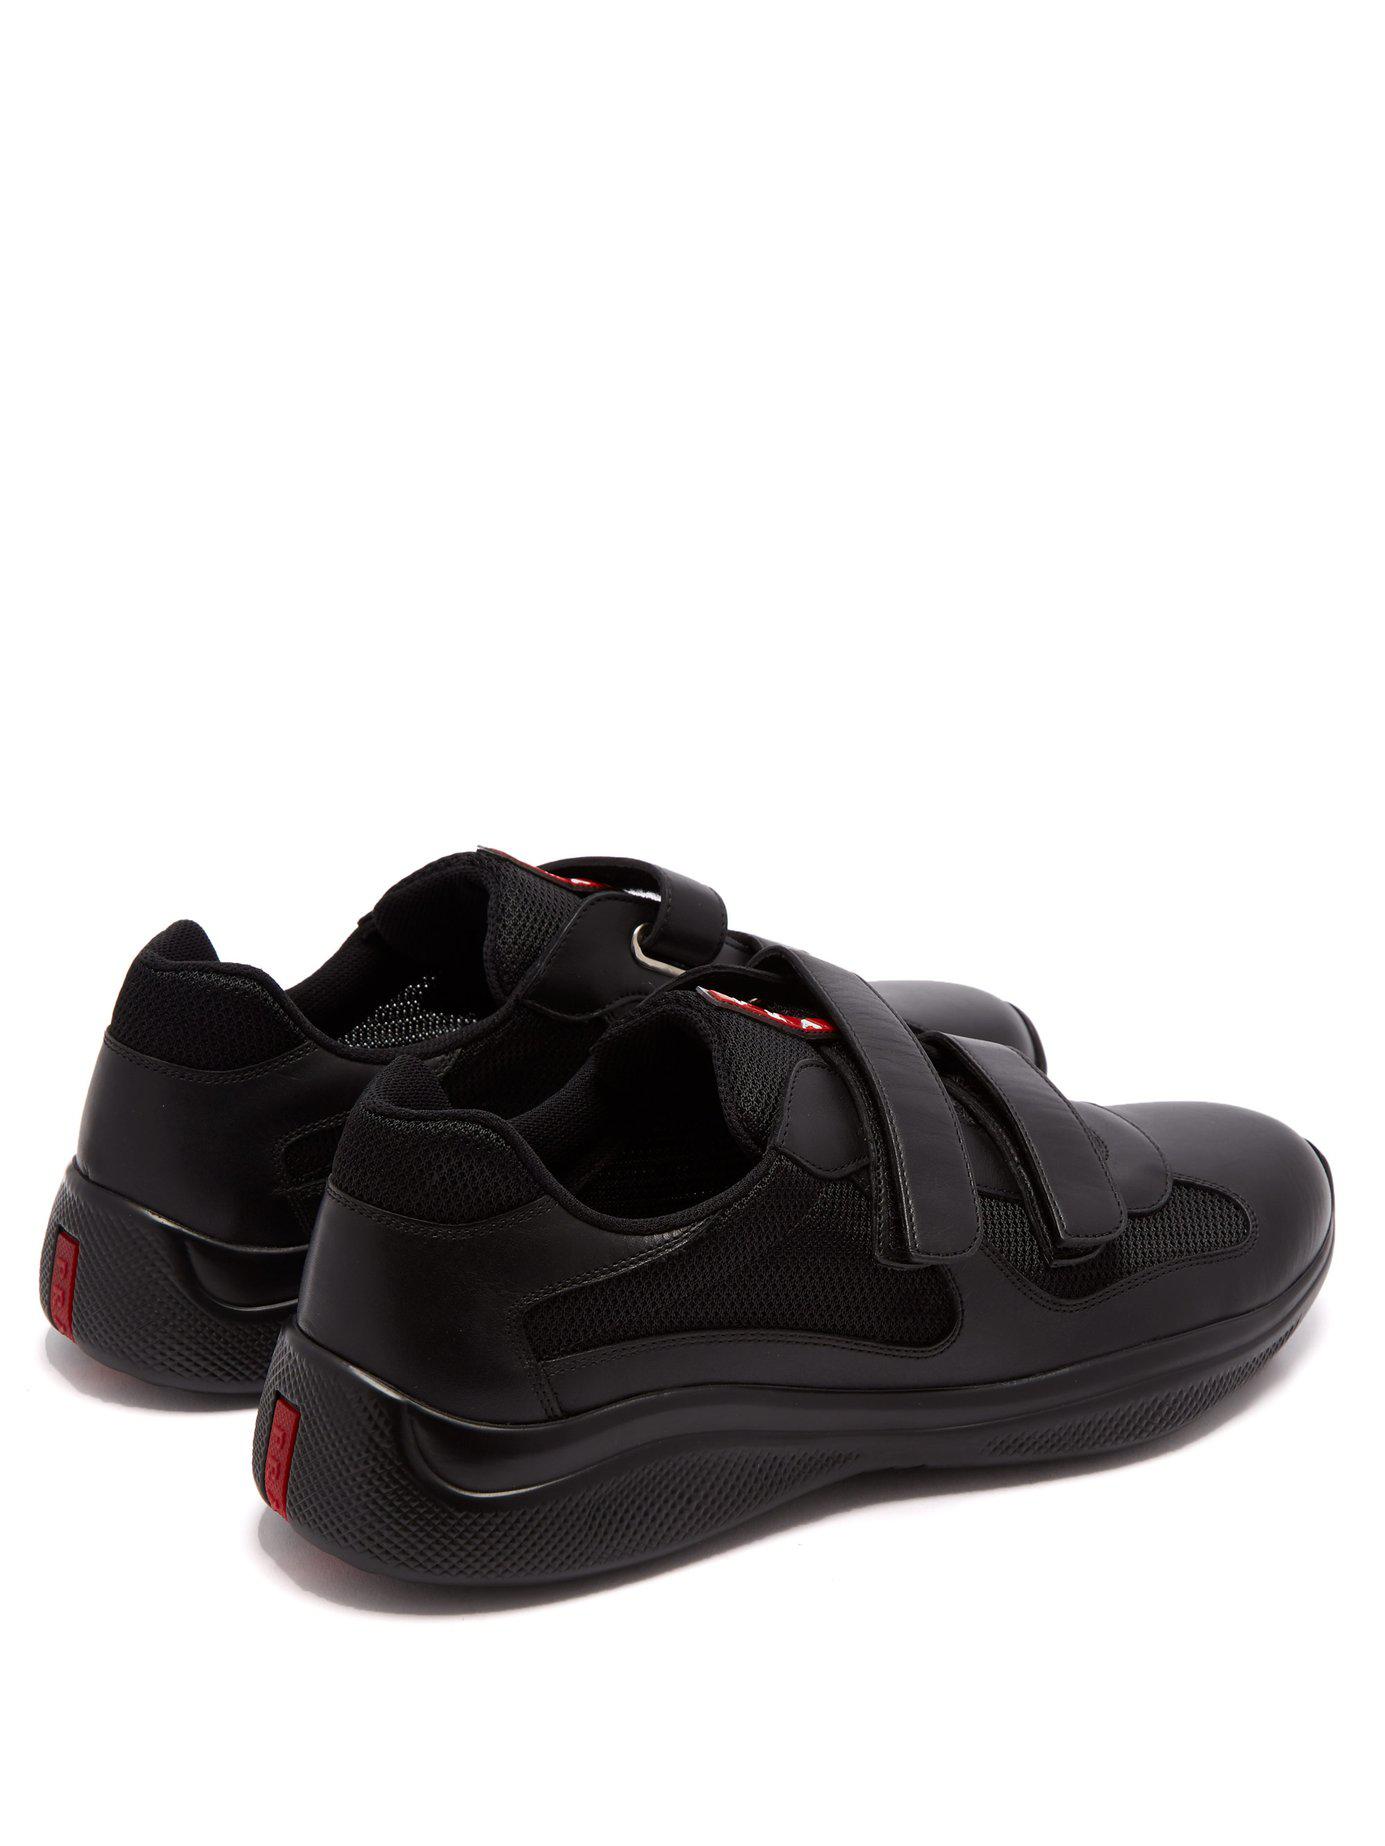 Prada Leather America's Cup Velcro-strap Trainers in Black for Men - Lyst